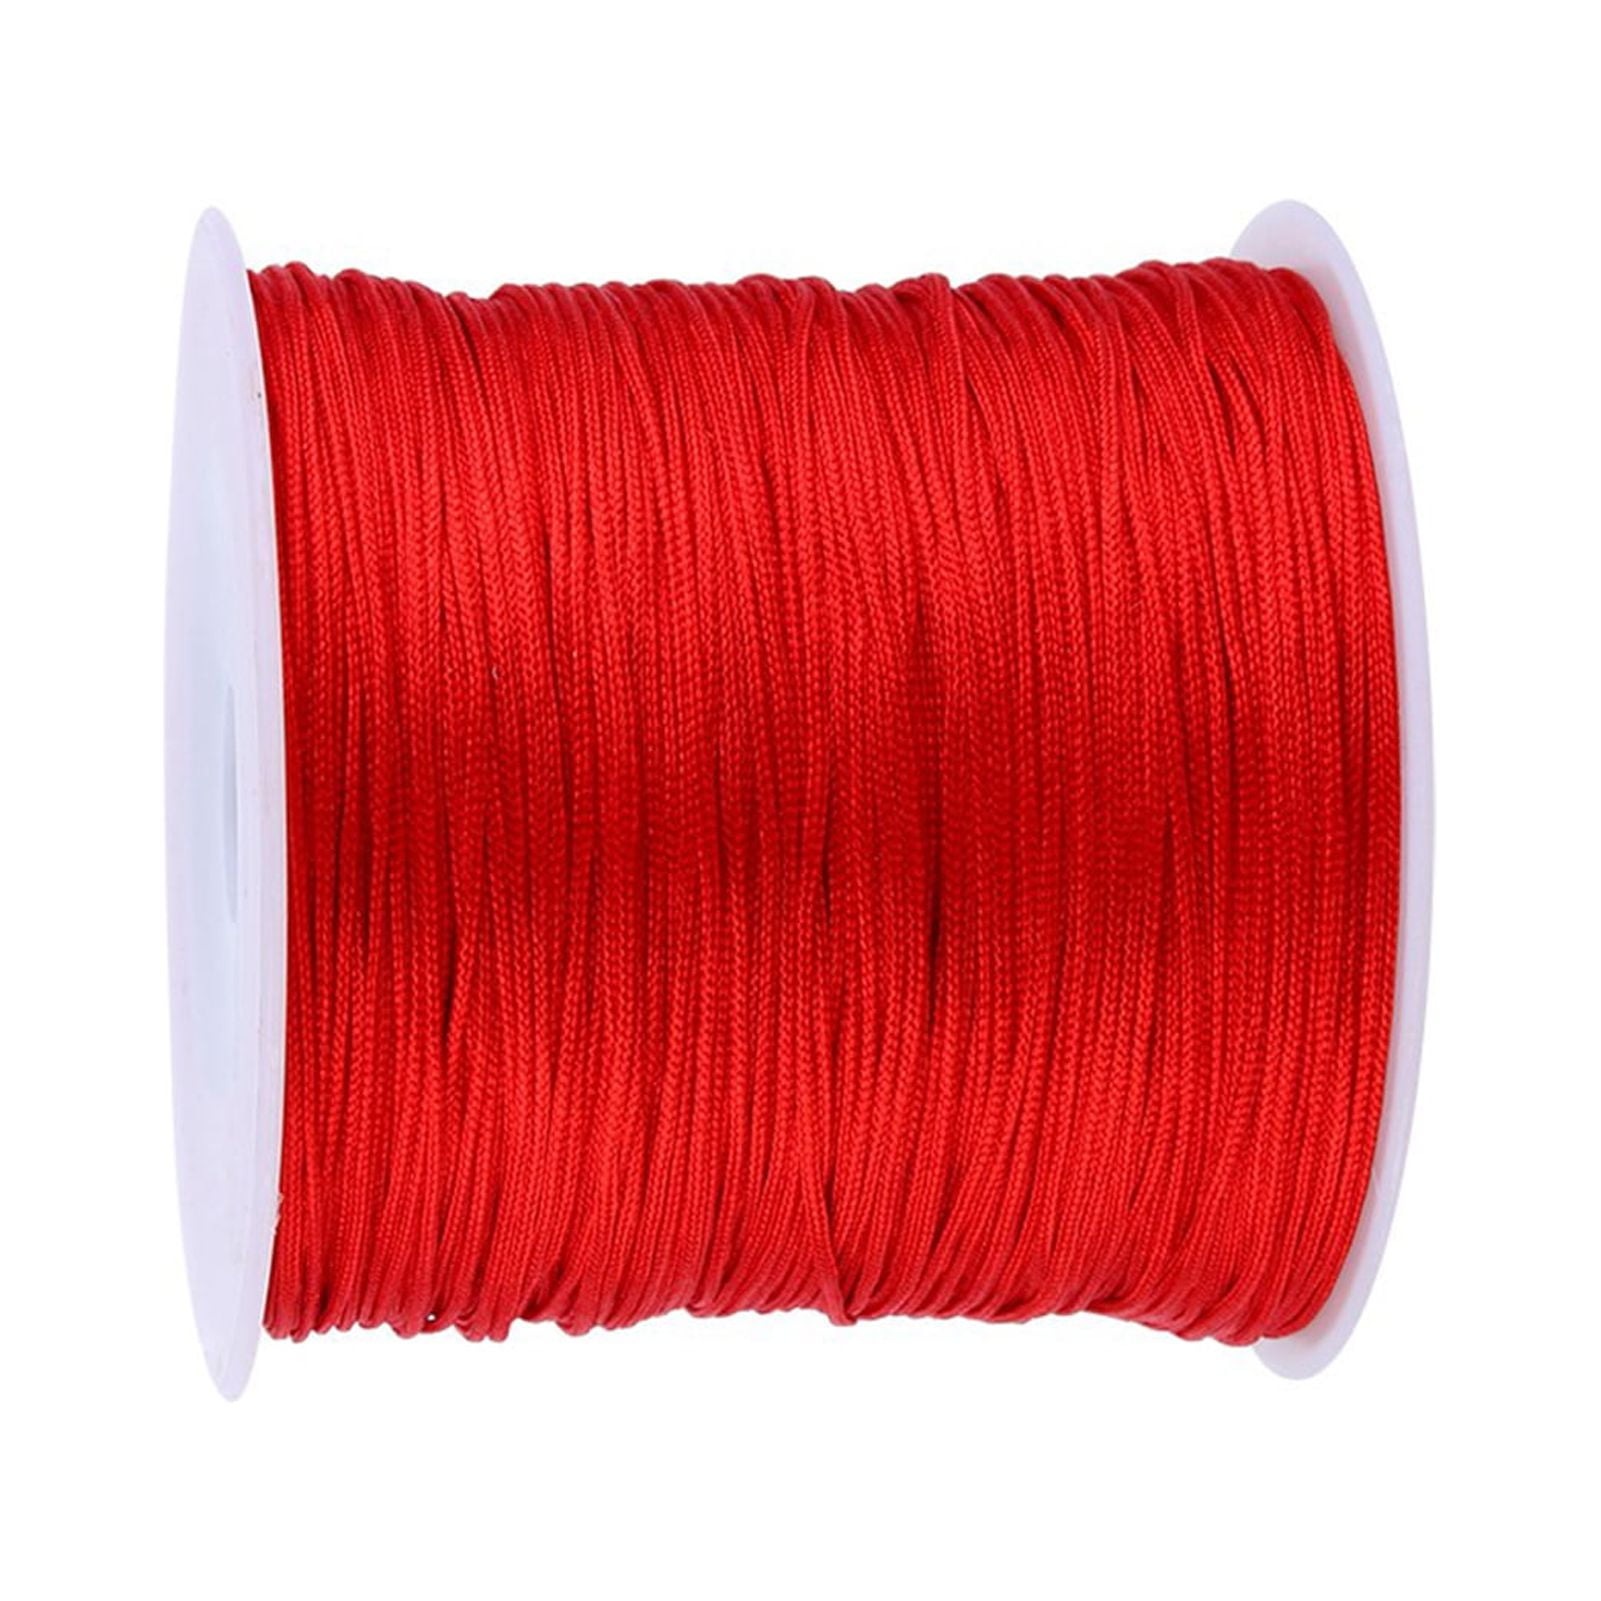  70 Rolls Chinese Knotting Cord 0.8 mm Nylon String for